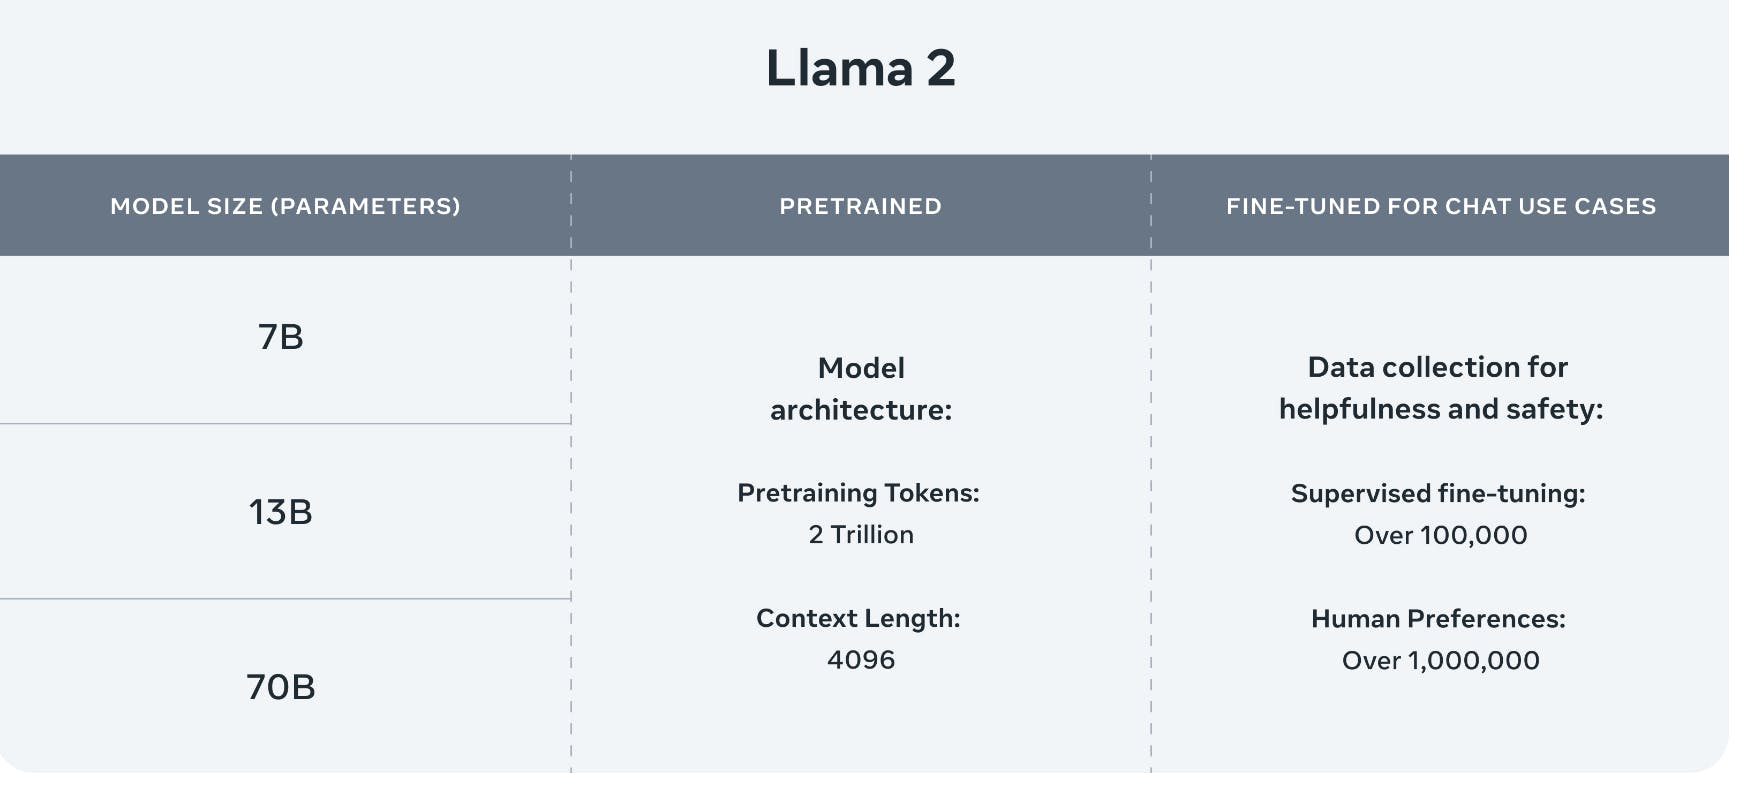 Llama 2 model size, pretrained, and fine-tuned for chat use cases